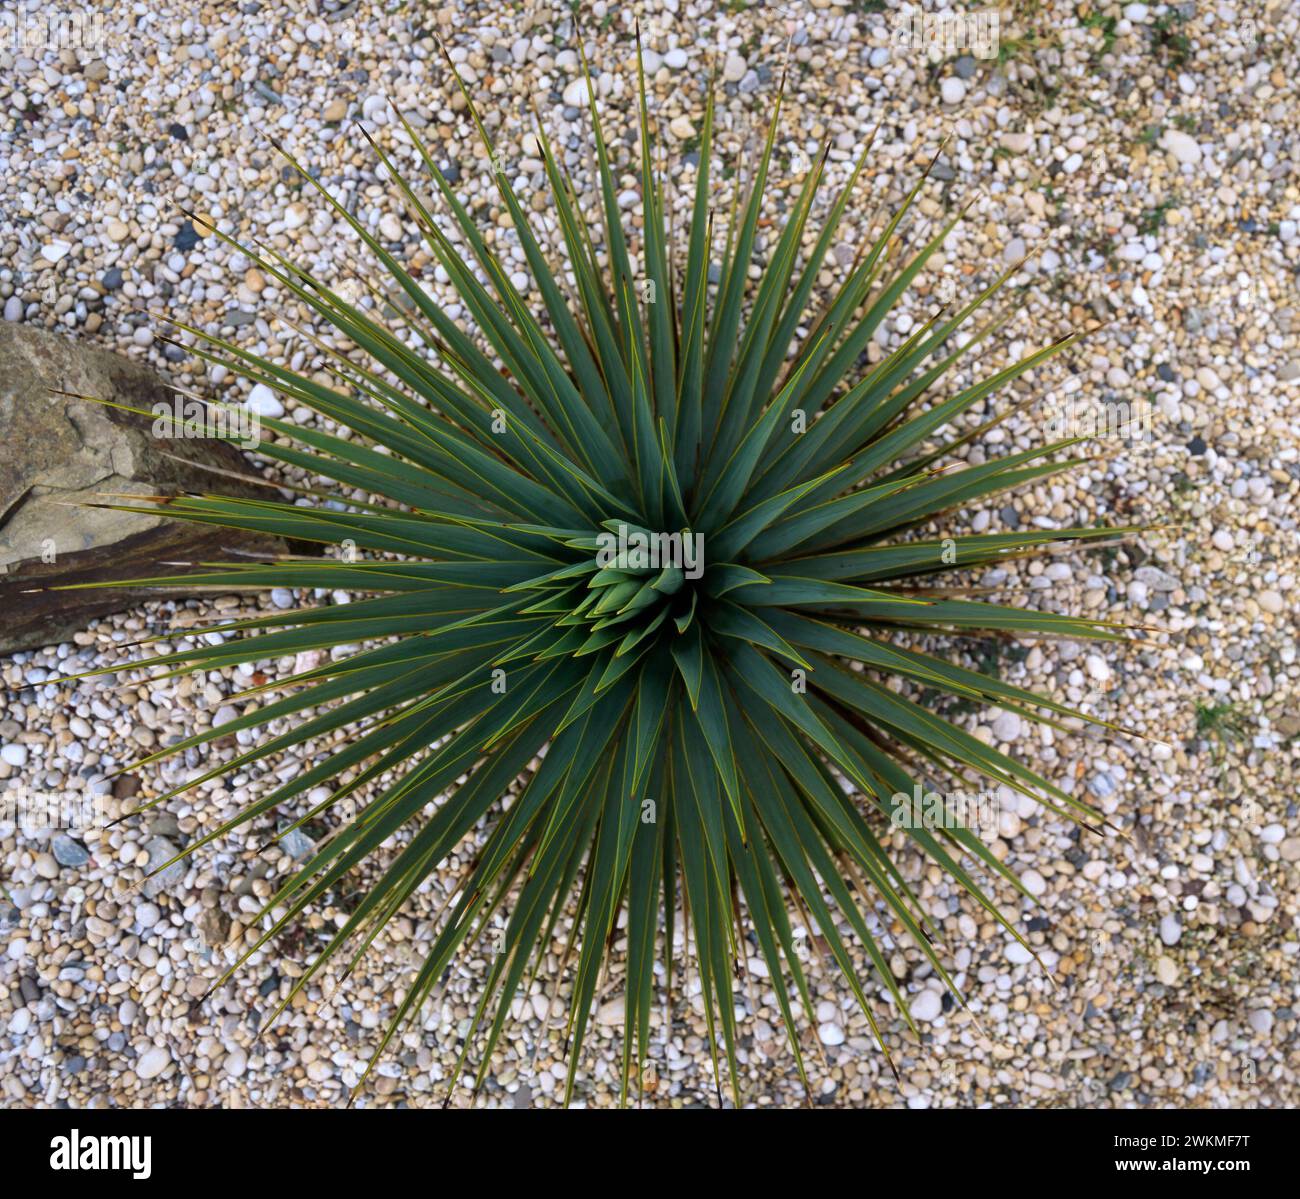 Looking down from above on on Yucca Thompsoniana (Thompsons Yucca) growing in gravel bed in English garden, England, UK Stock Photo